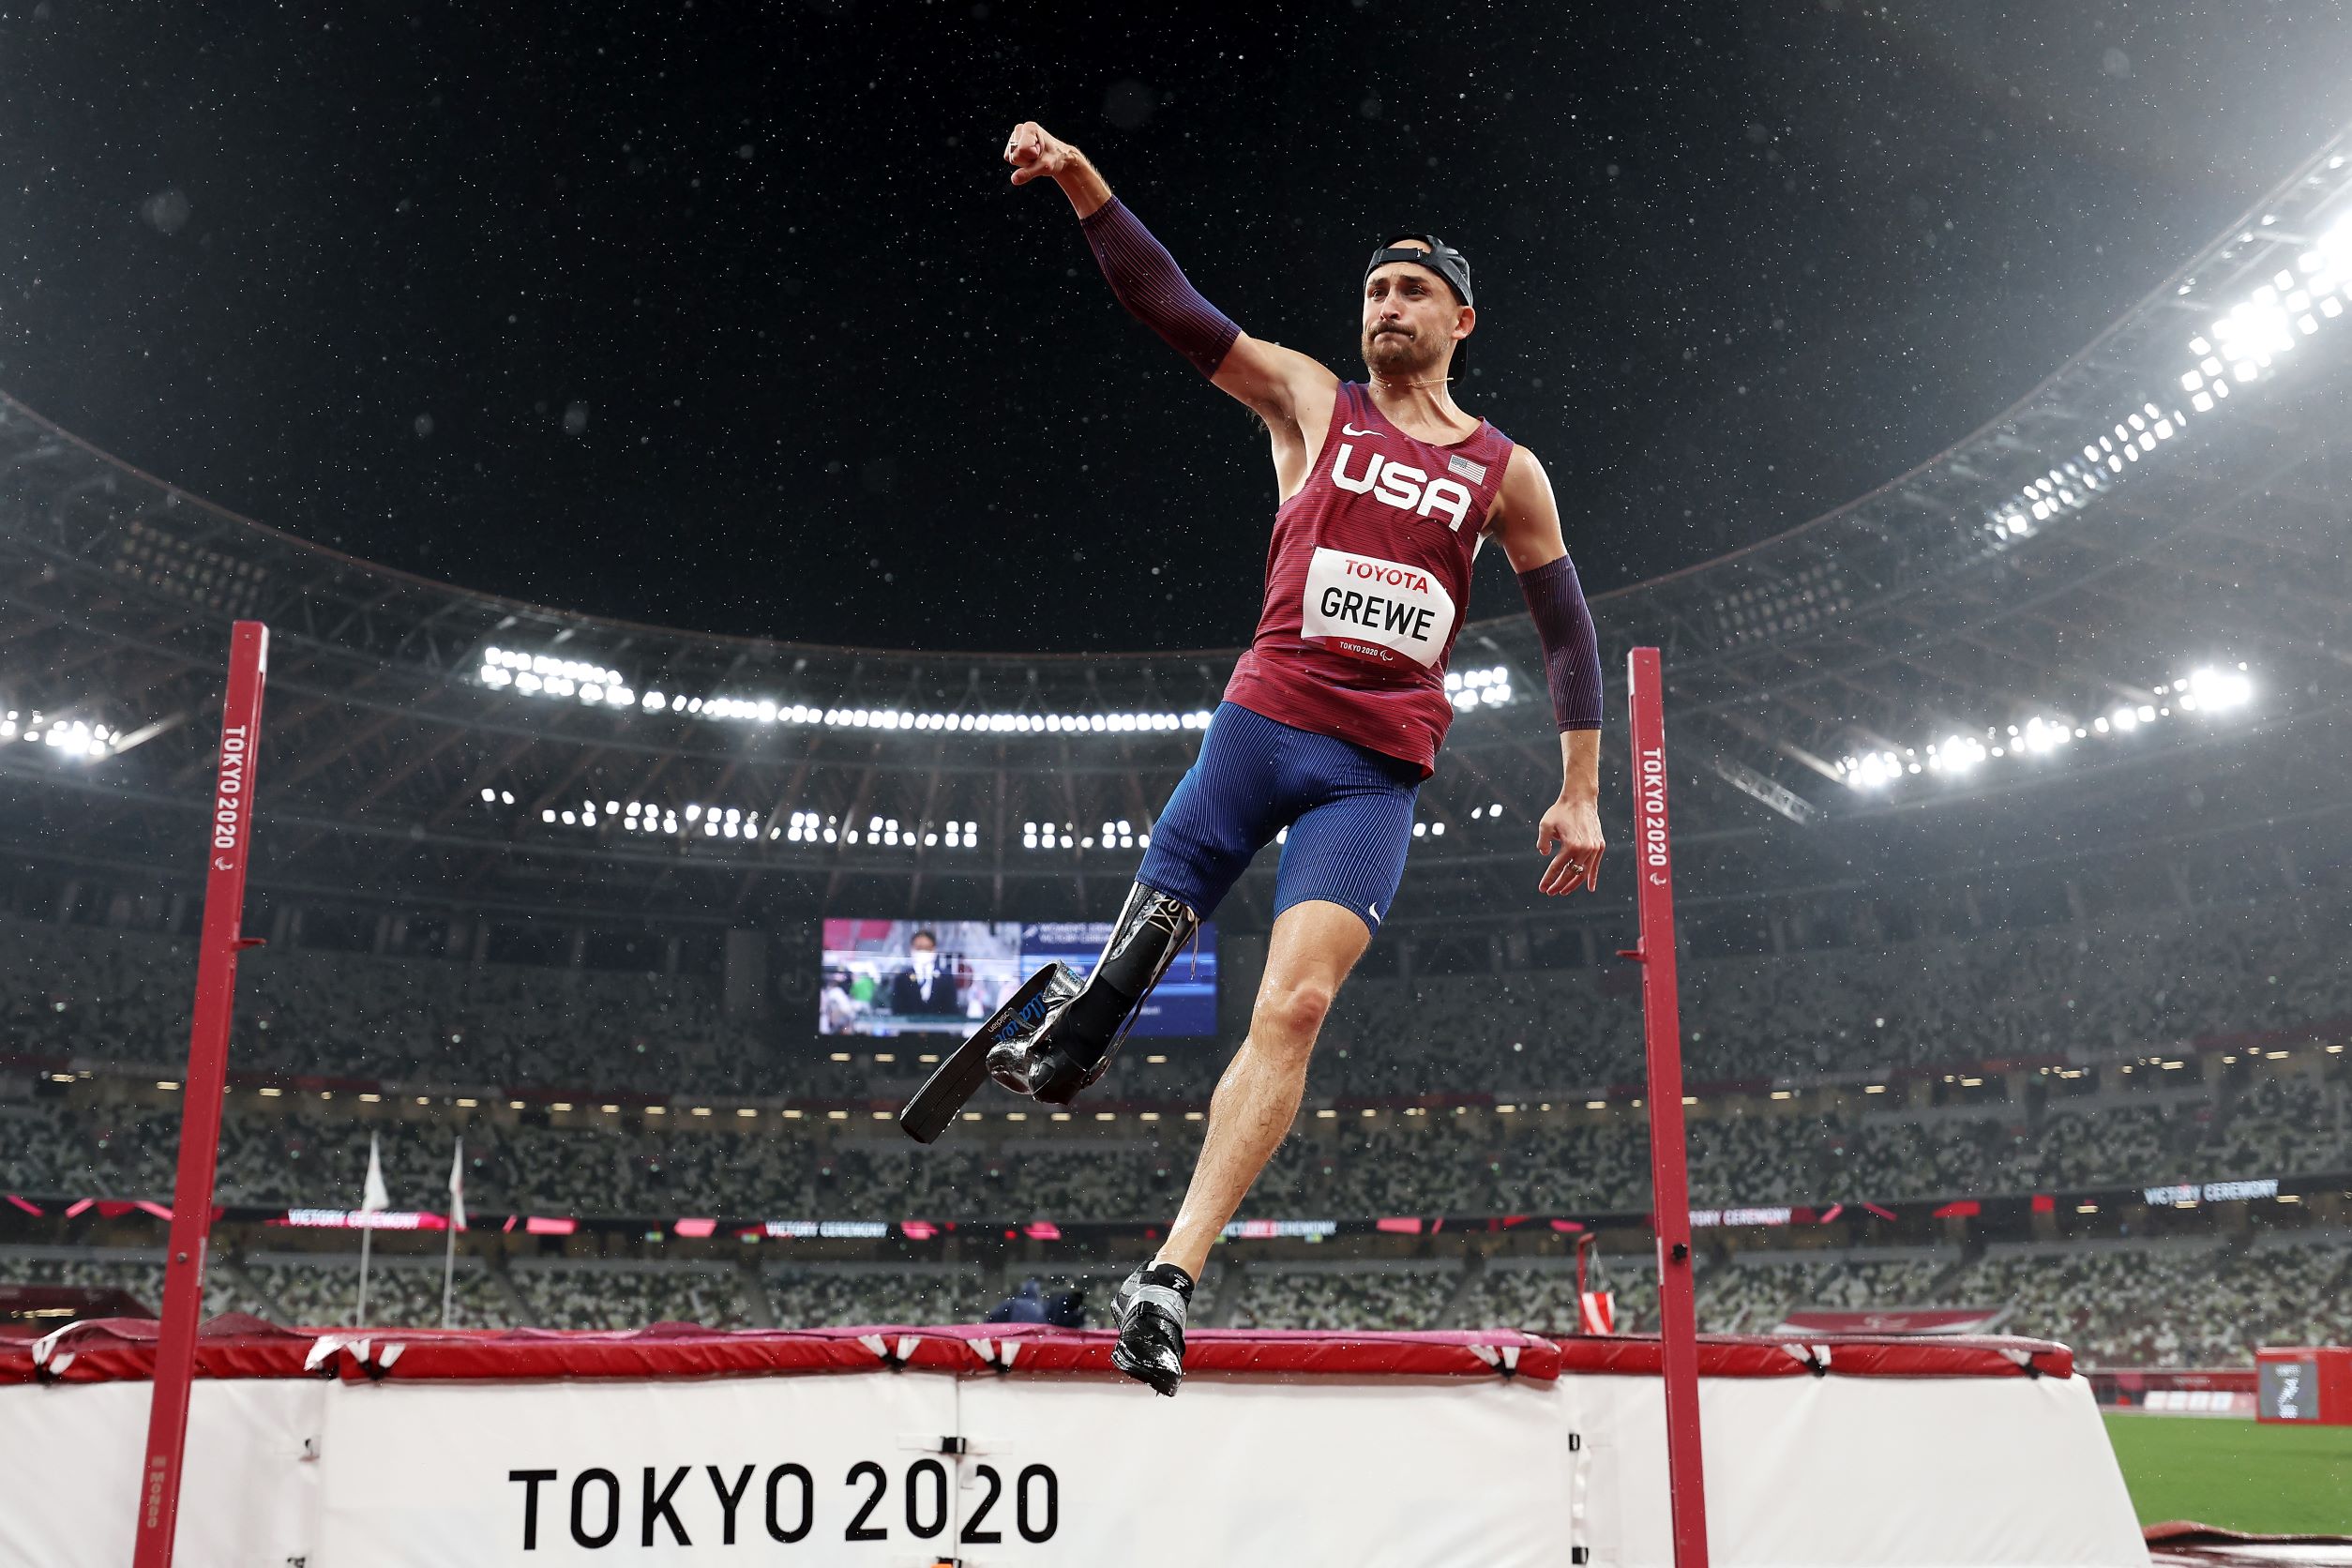 A male high jumper raises his right fist in celebration after winning his event at the Tokyo 2020 Paralympic Games.